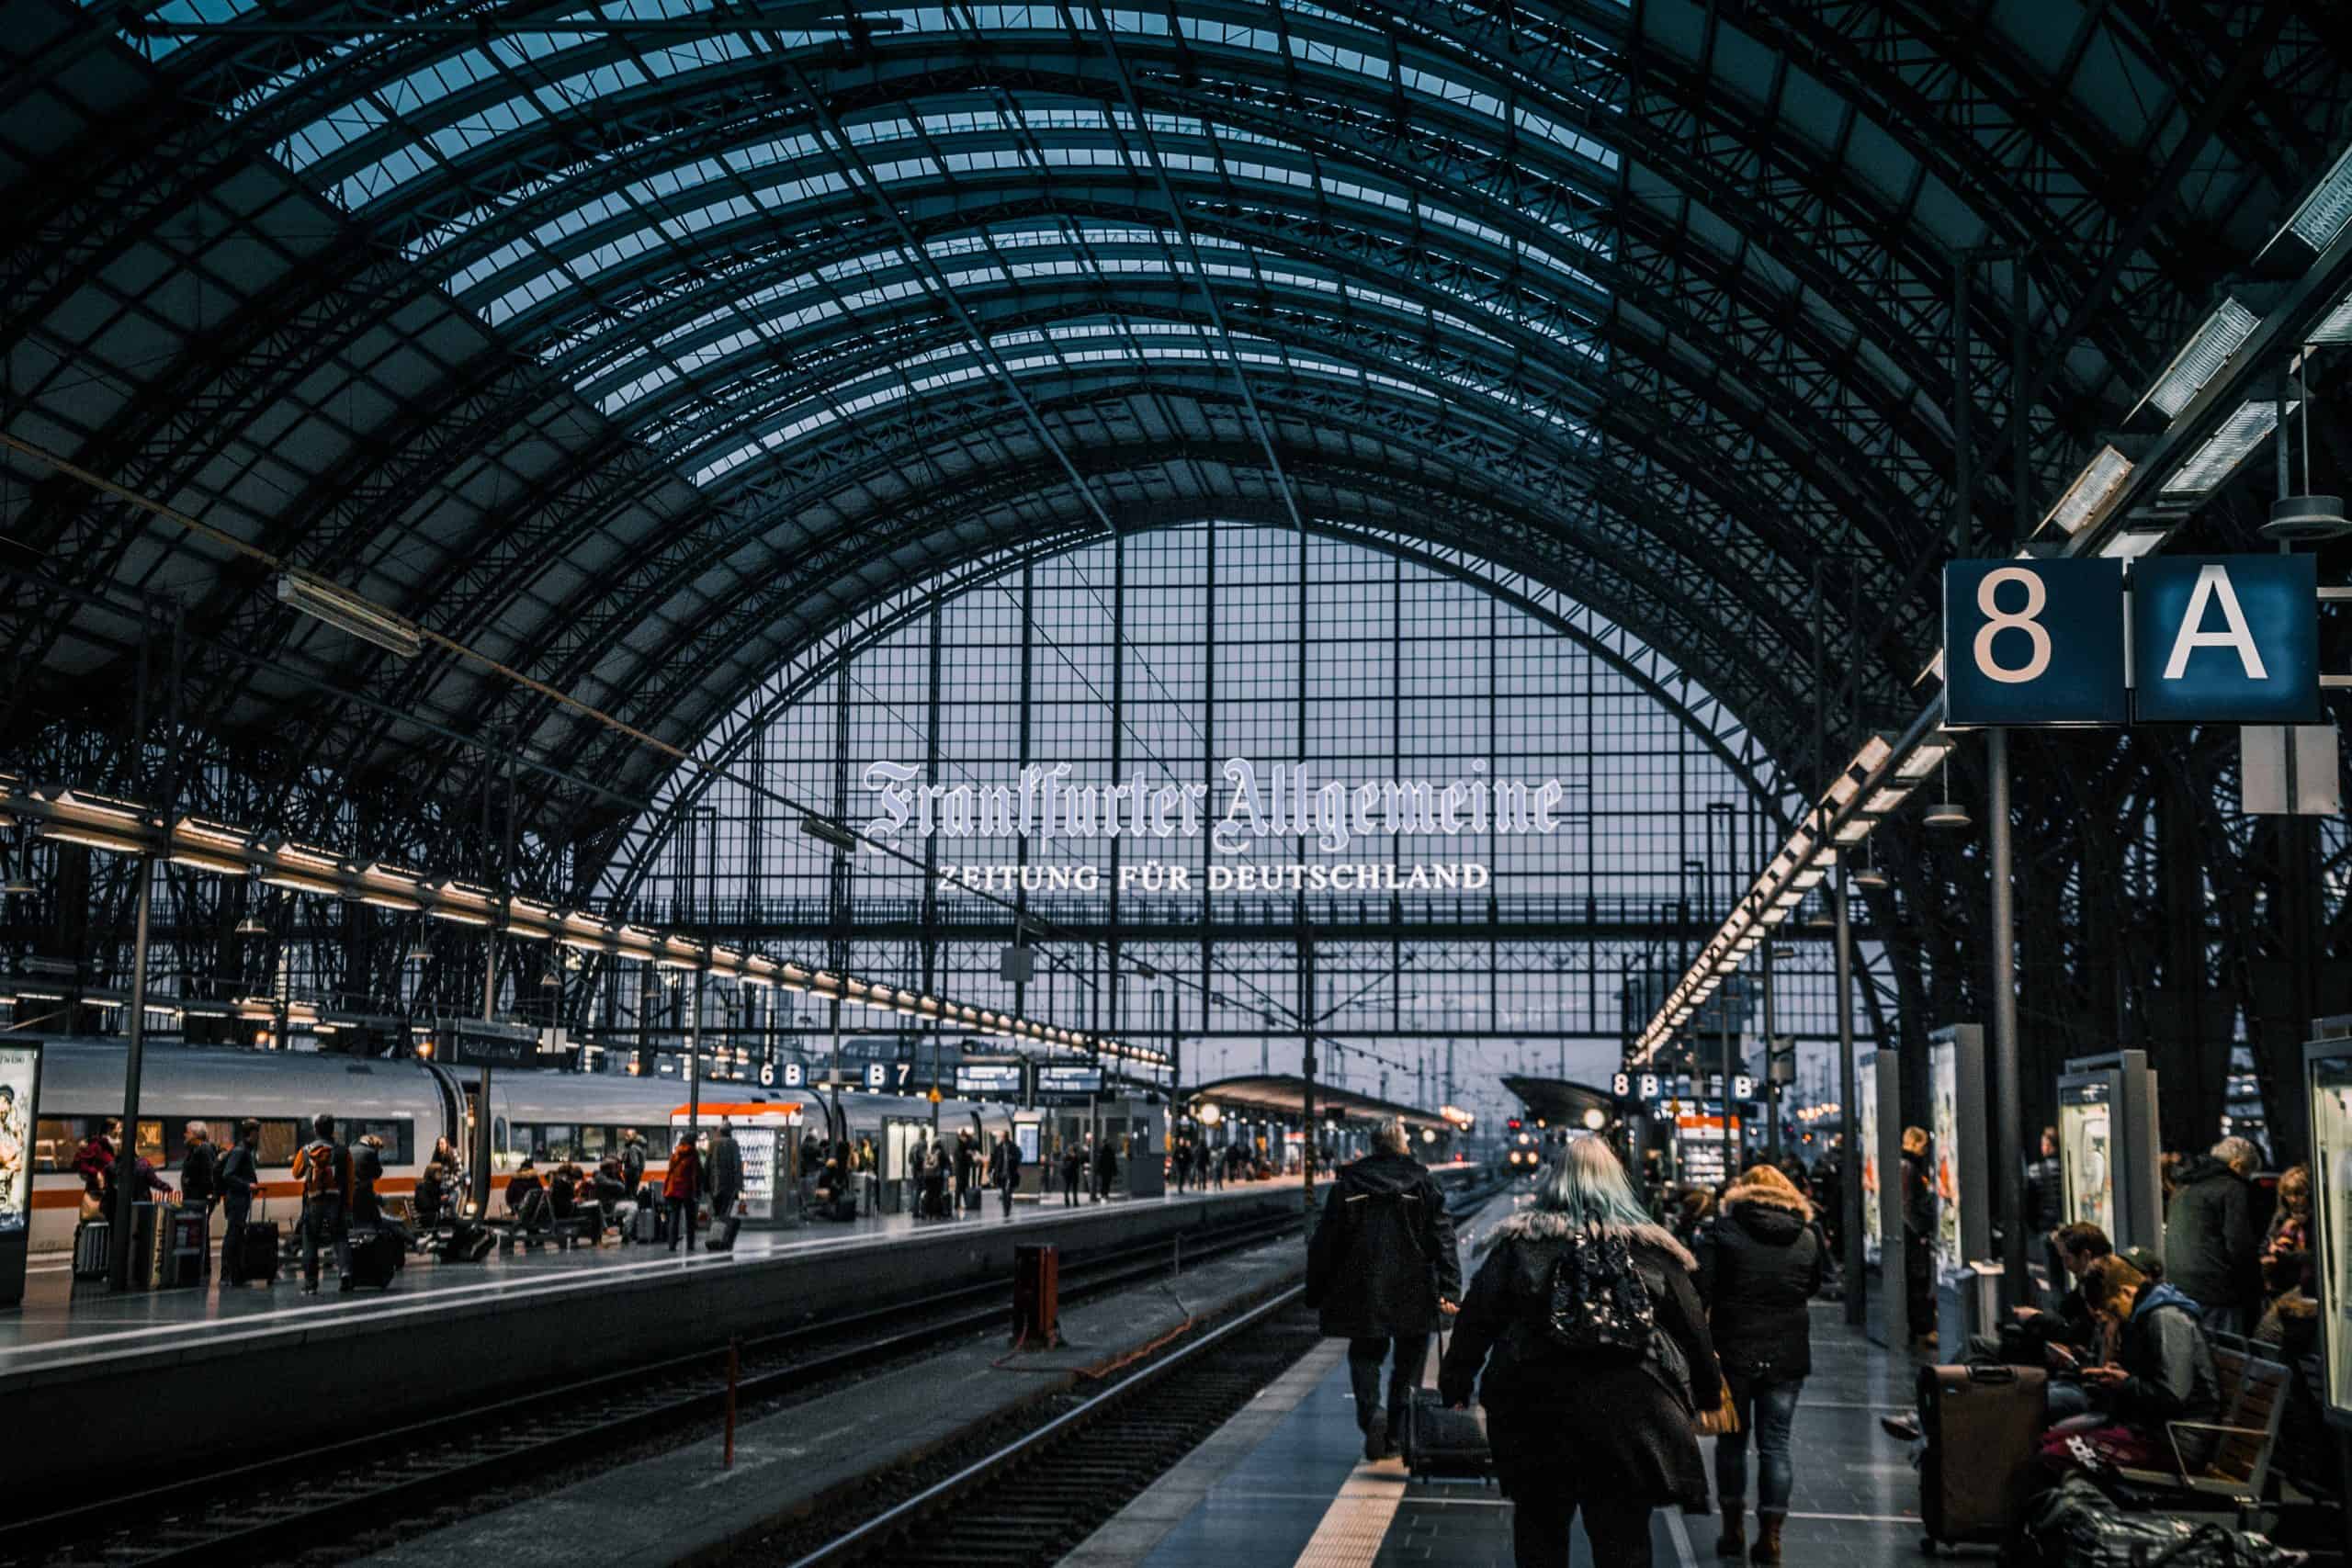 Near-free rail travel in Germany saved 1.8 million tons of CO2